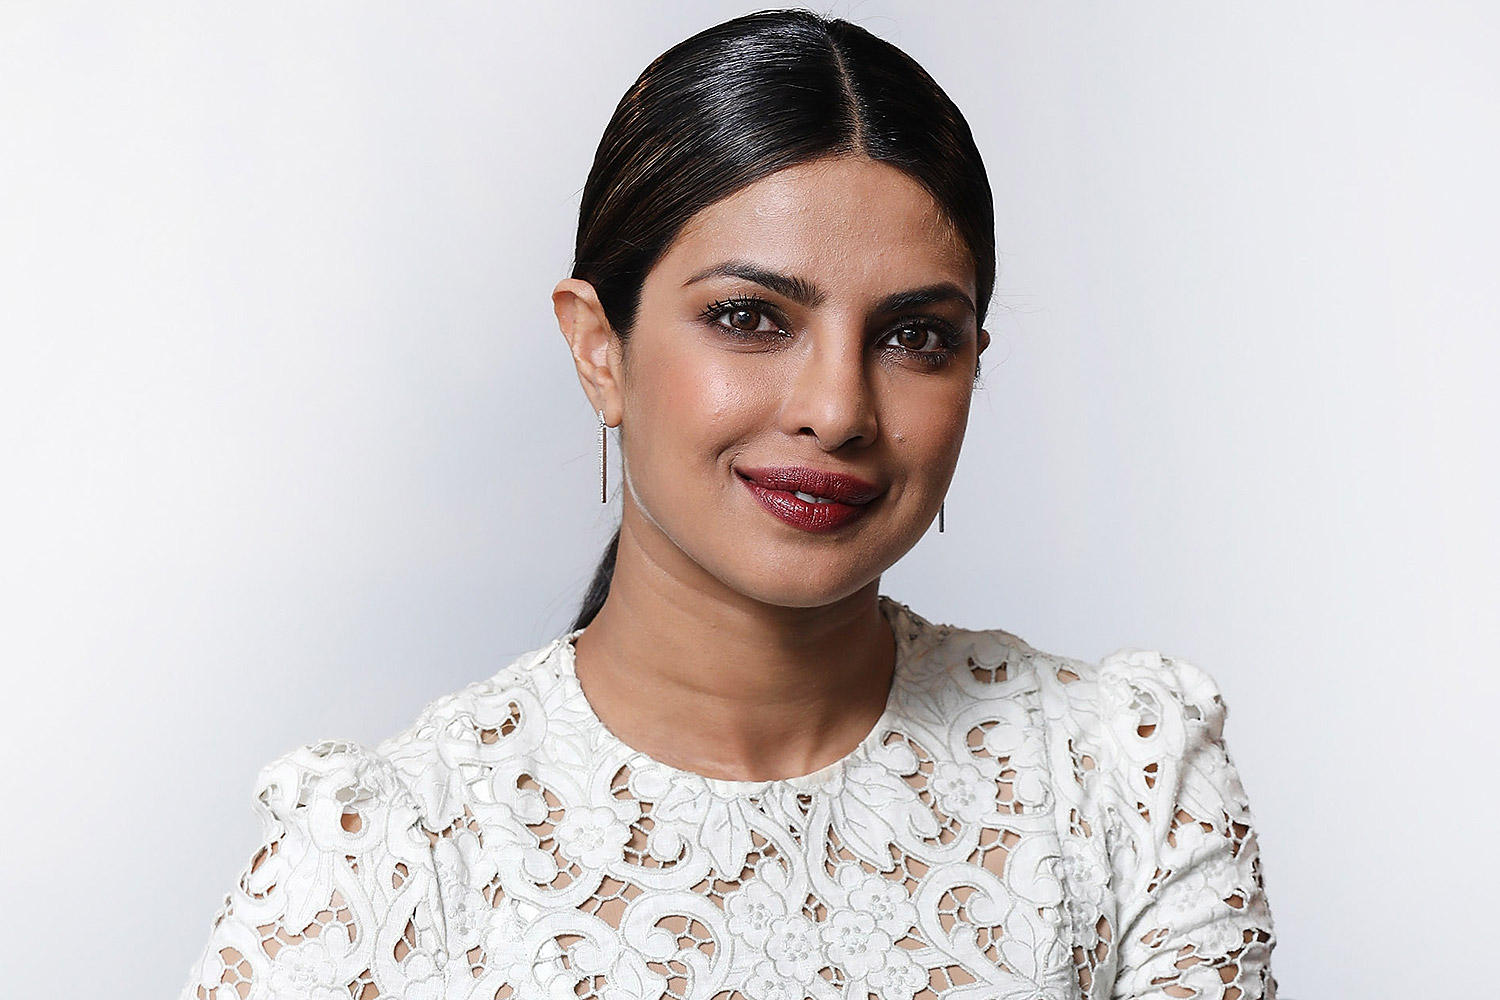 Priyanka Chopra works jointly with WHO to spread awareness over COVID-19_50.1